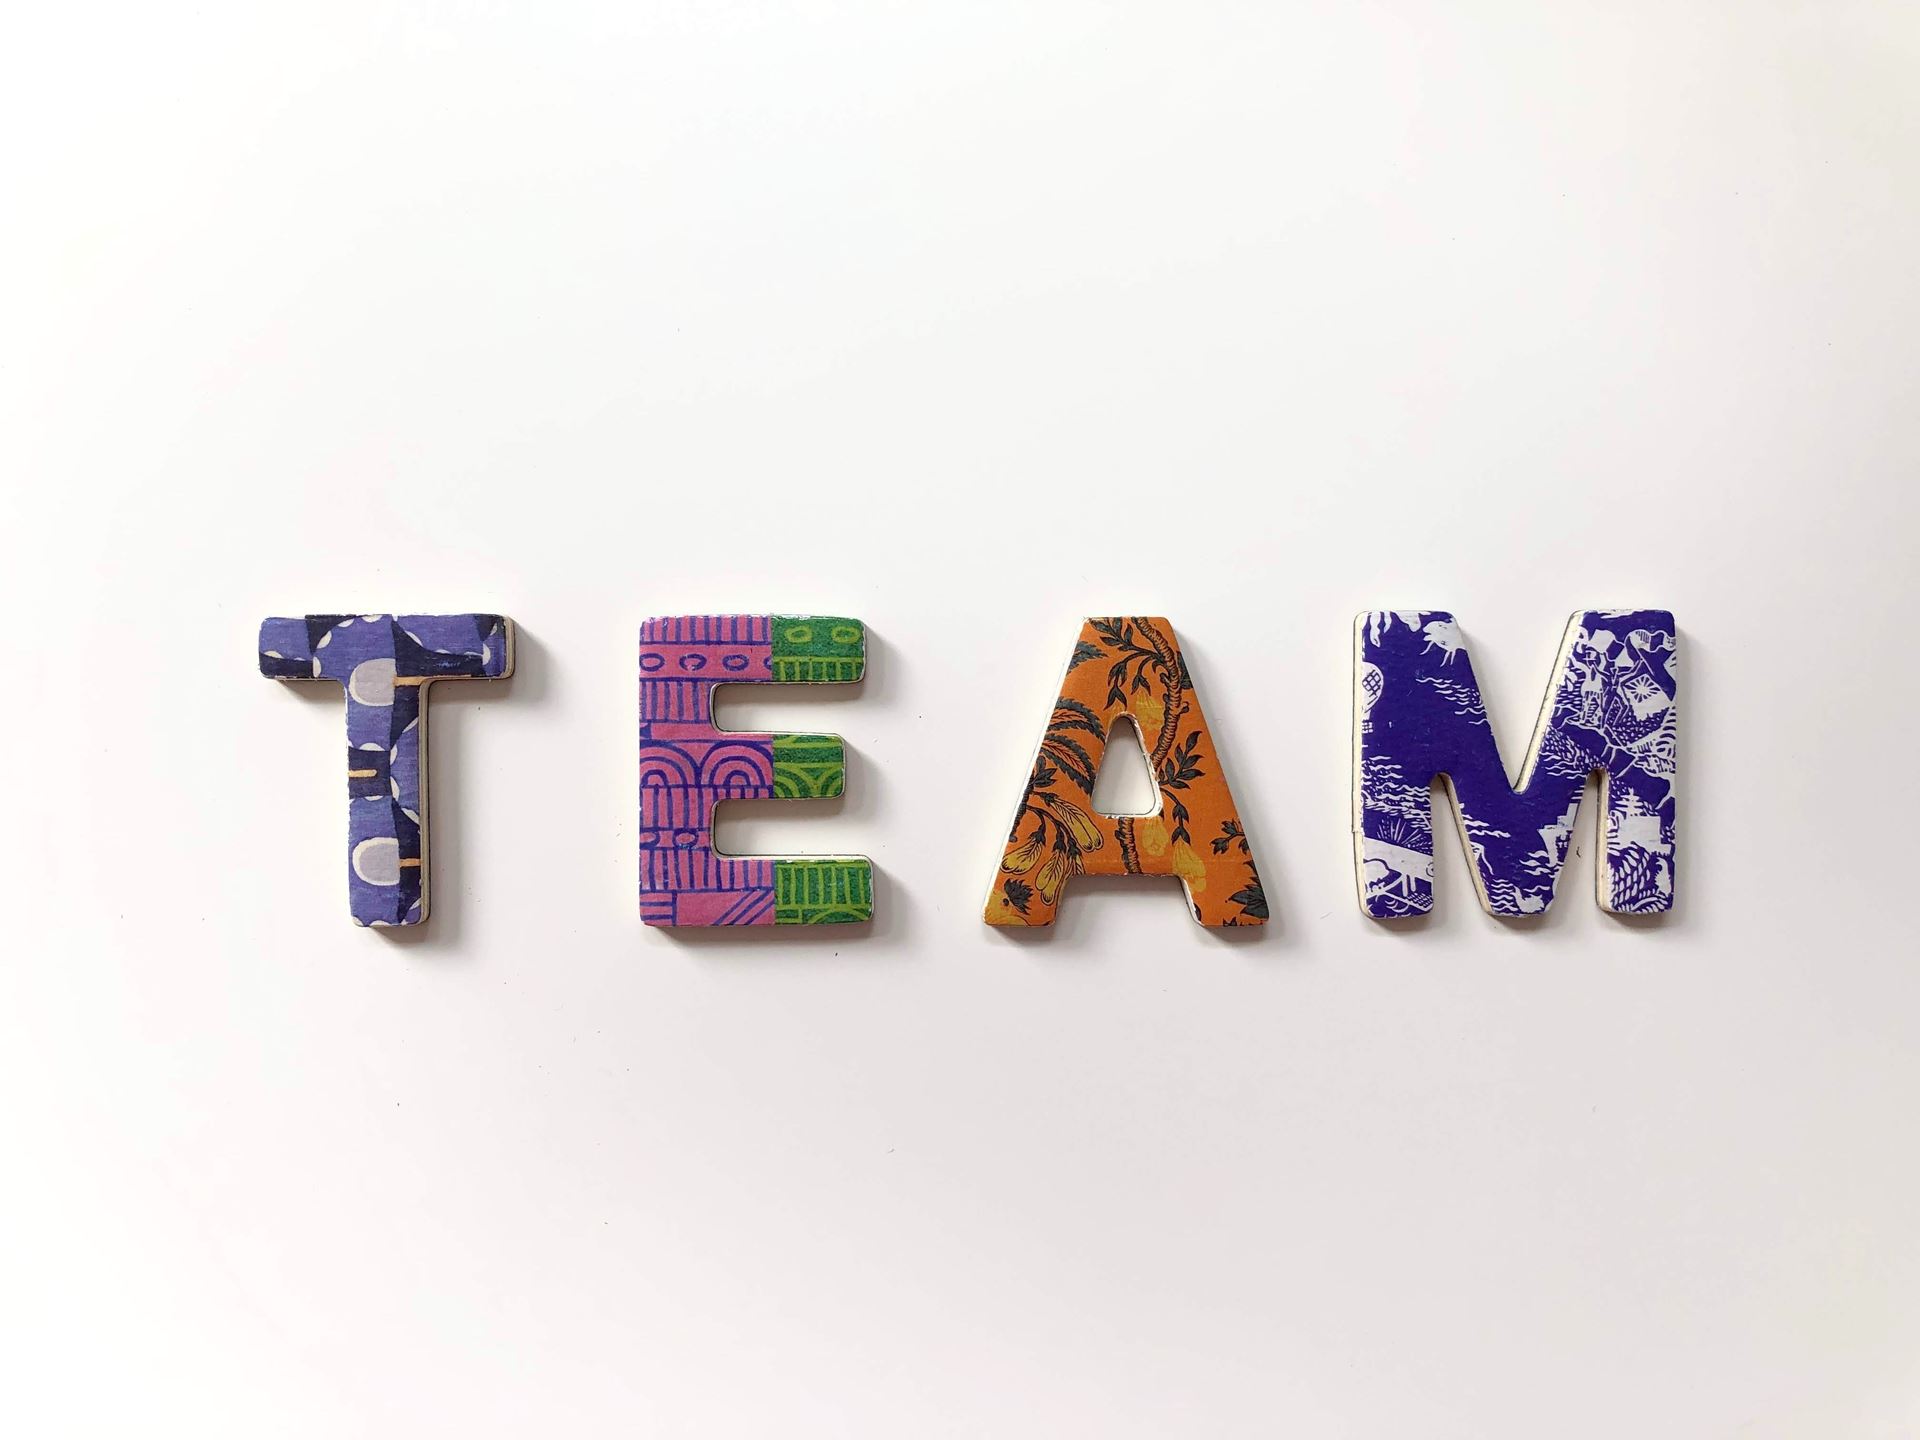 The word TEAM spelled out